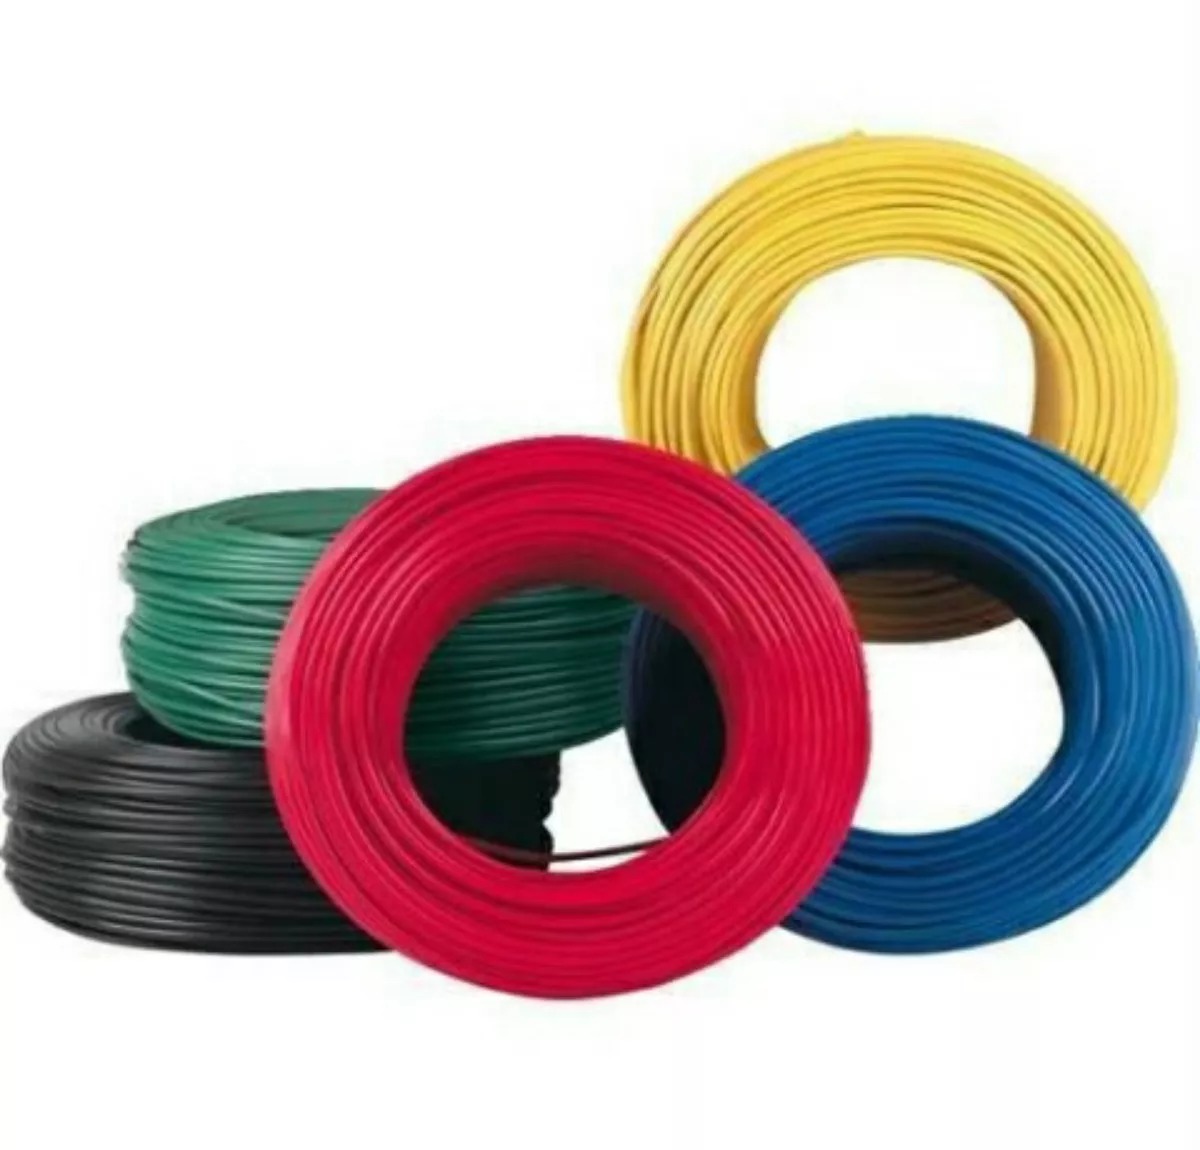 cables-electricos-5